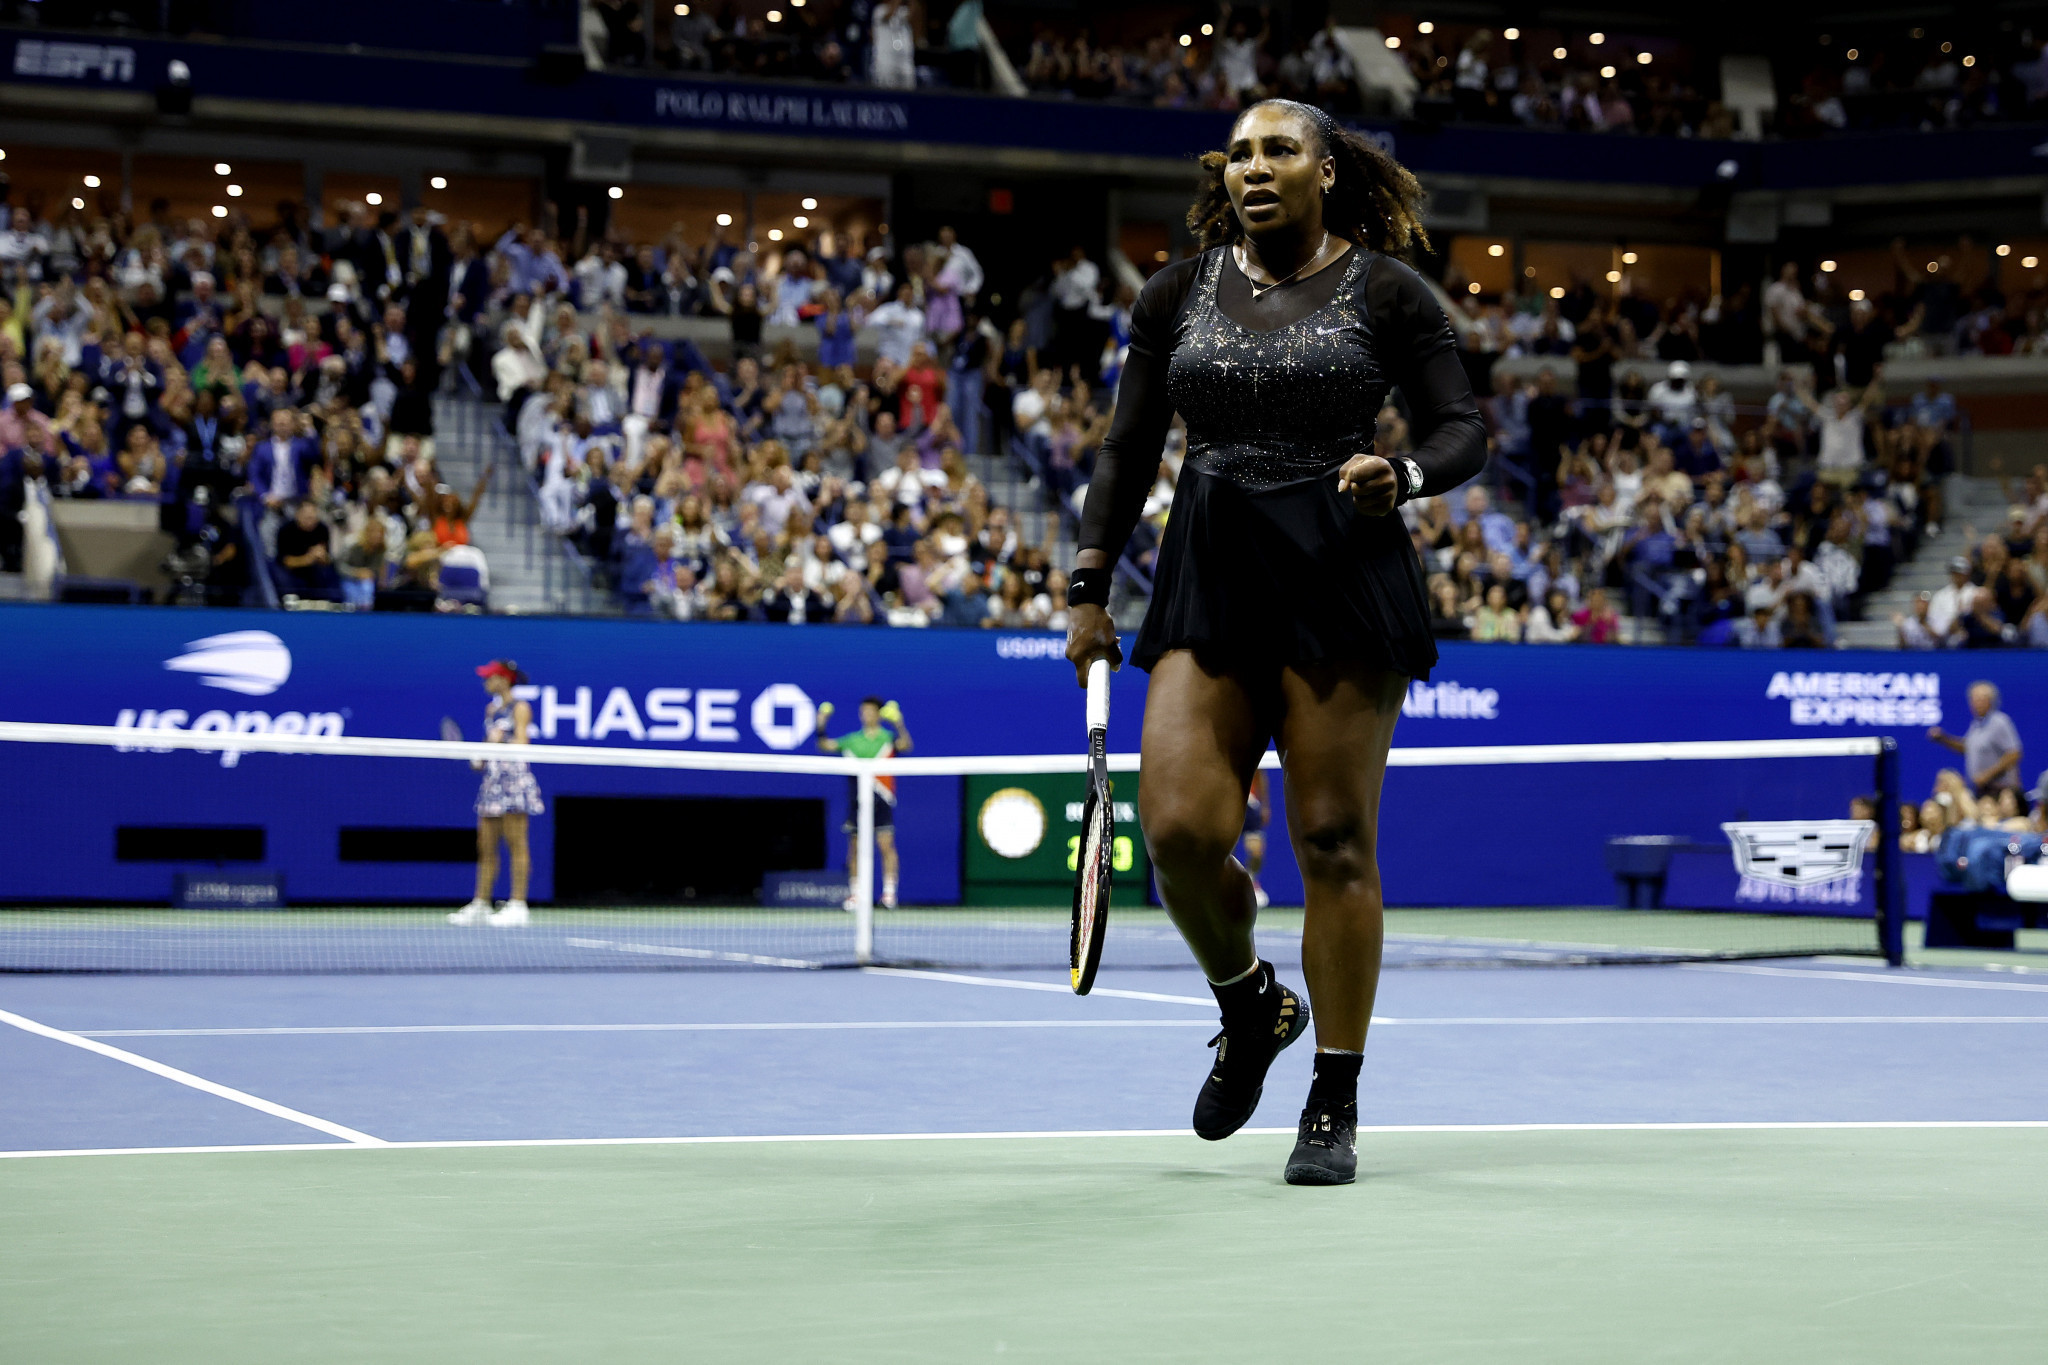 Serena Williams of the United States is widely expected to retire after her third-round defeat at the US Open ©Getty Images